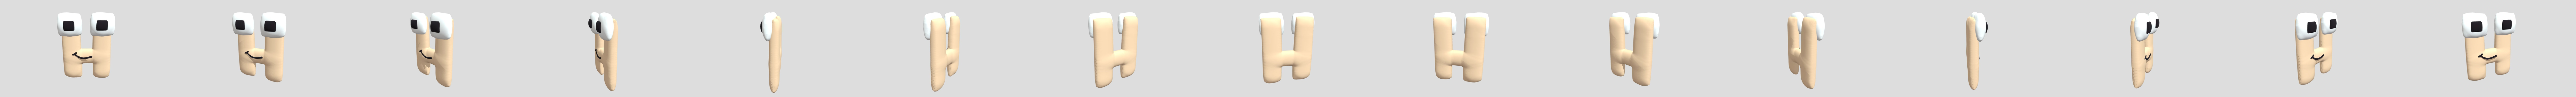 Harrymation Э (Russian Alphabet Lore) - Download Free 3D model by  aniandronic (@aniandronic) [8a78b60]